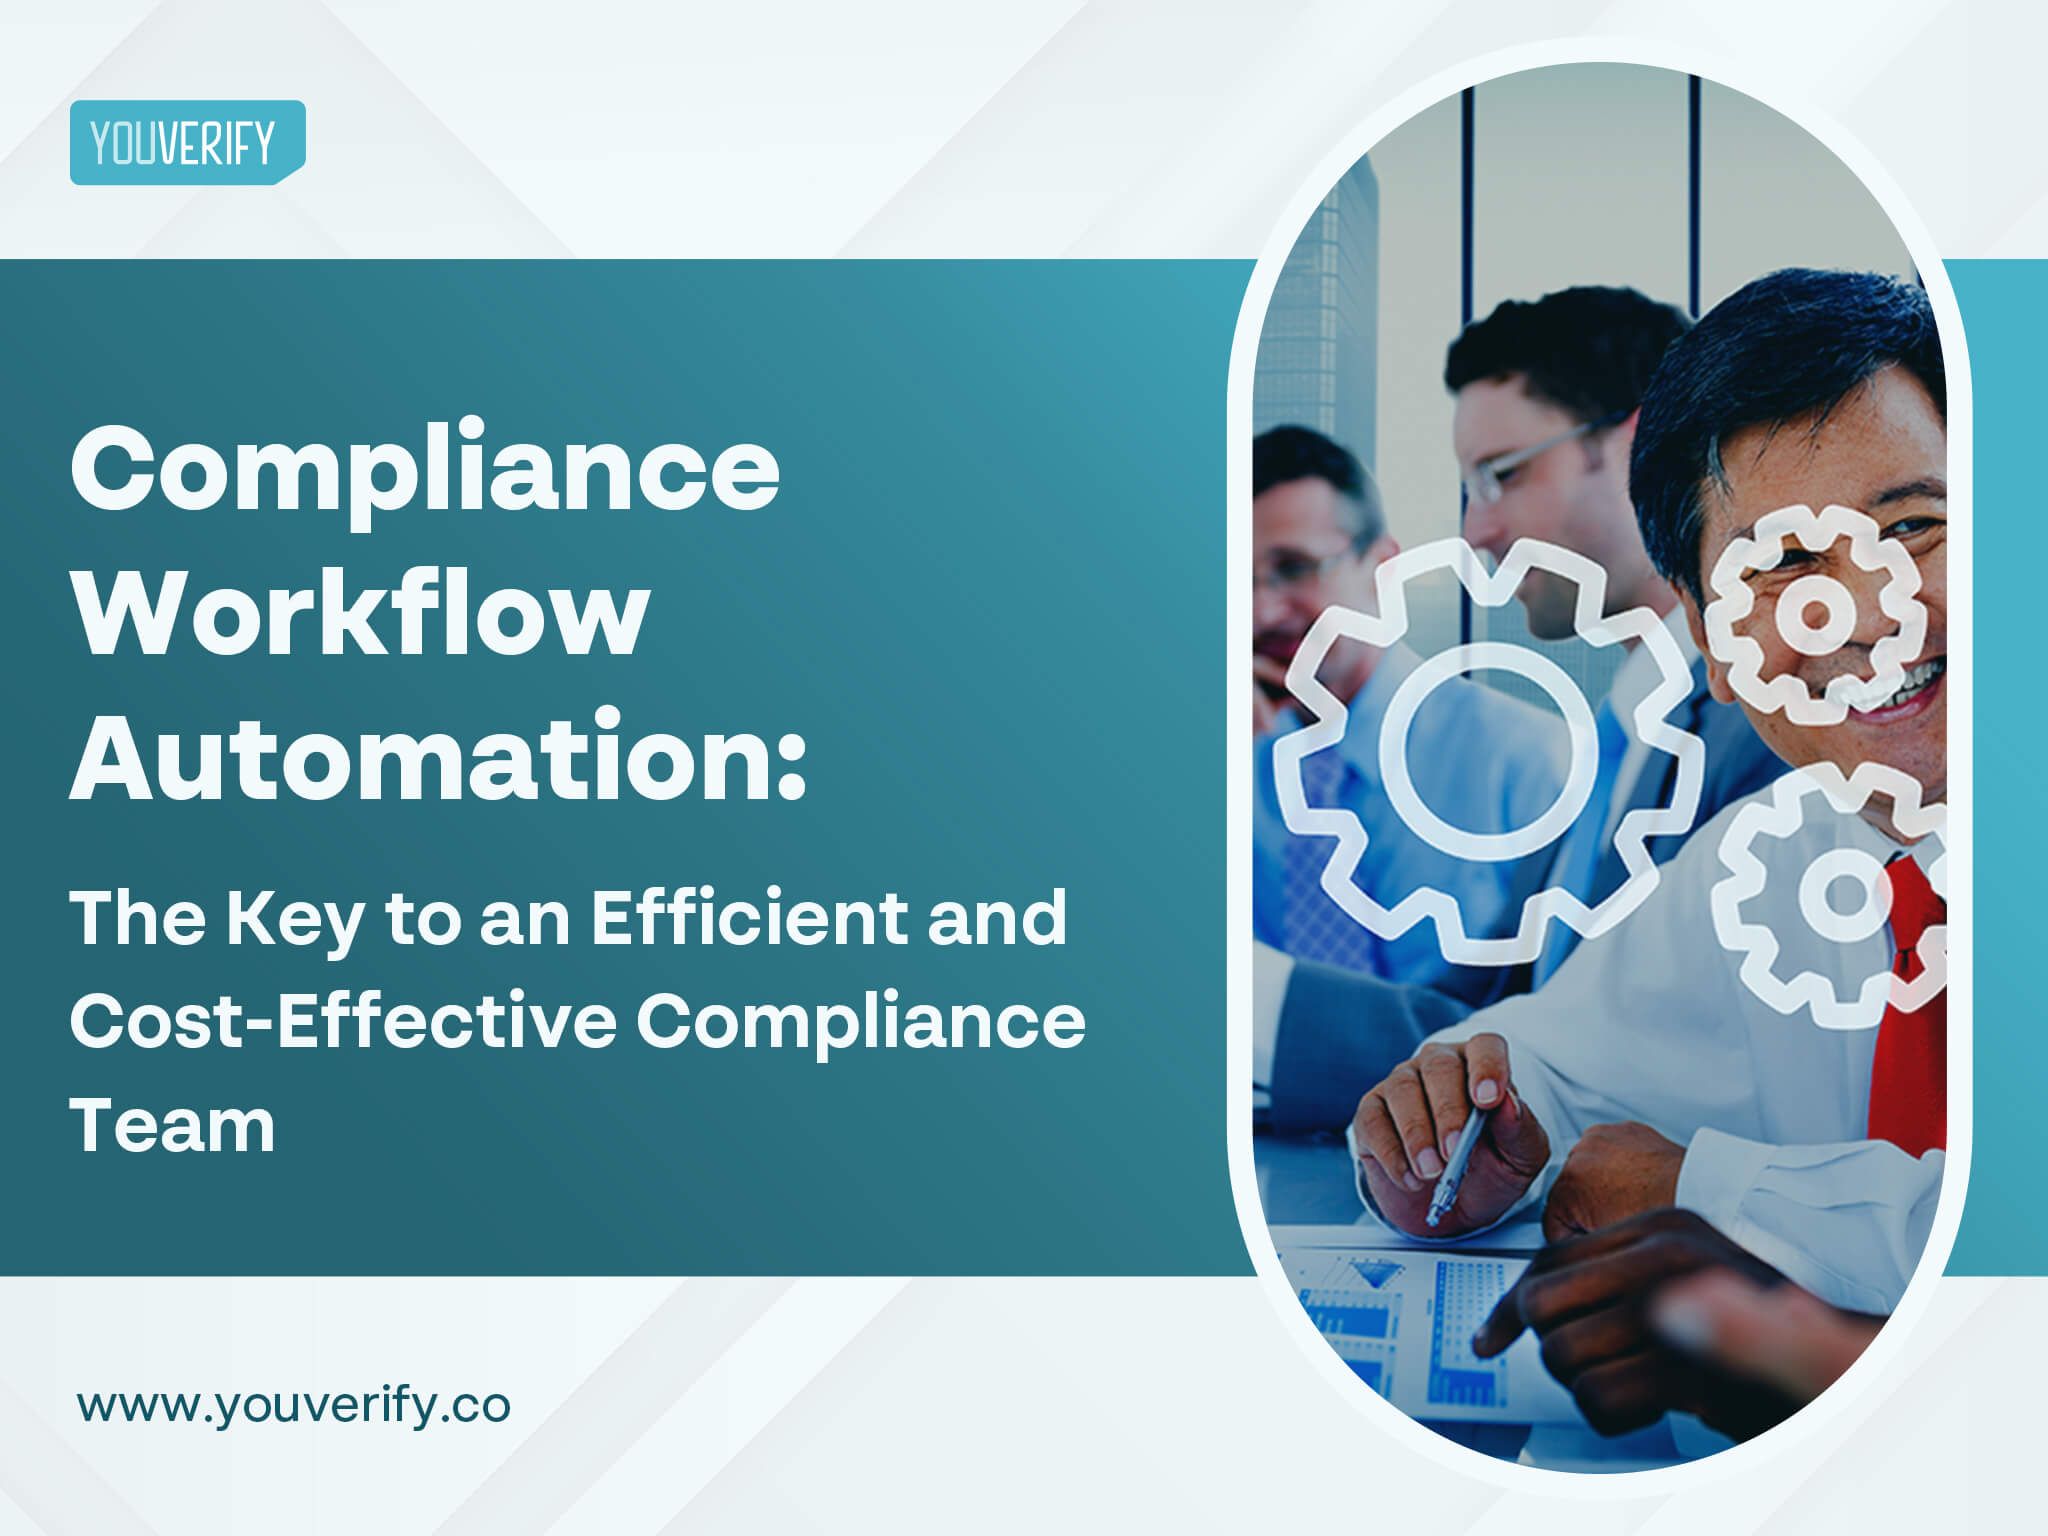 What is Compliance Workflow Automation?